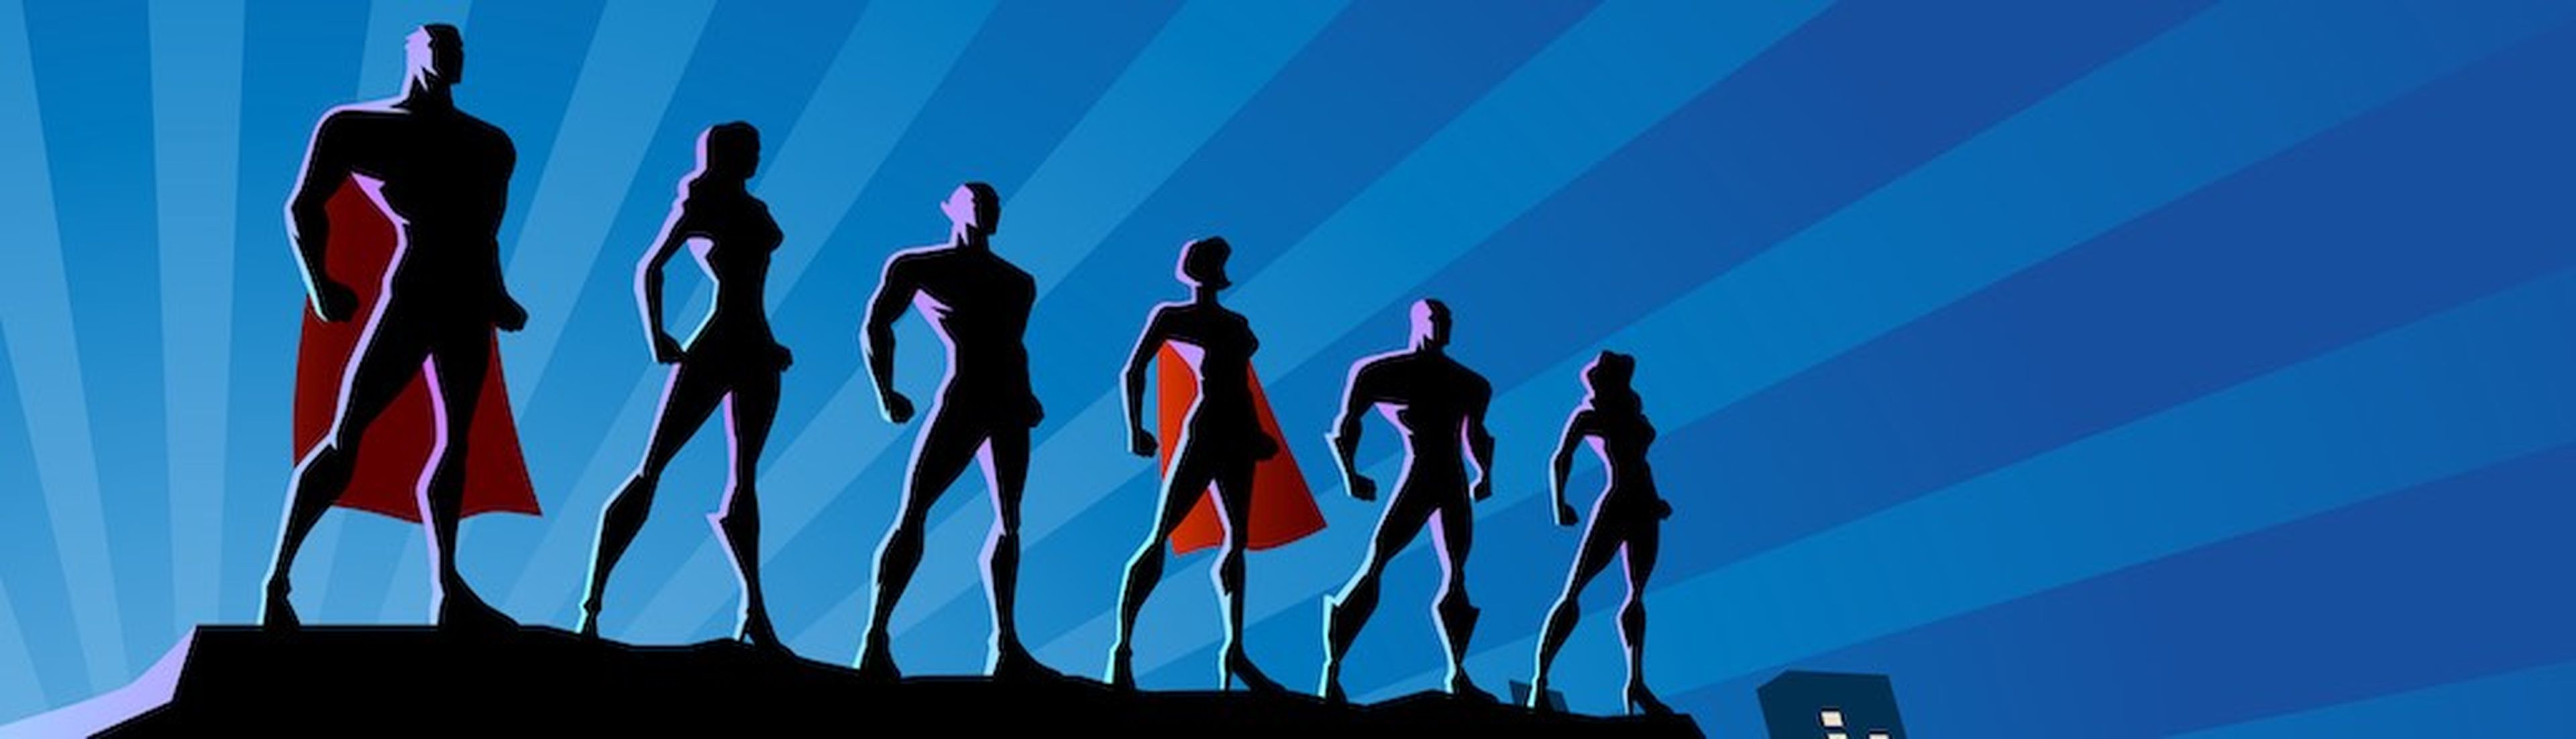 A silhouette style vector stock illustration of a team of superheroes standing on top of a rock with city skyline and light bursts in the background